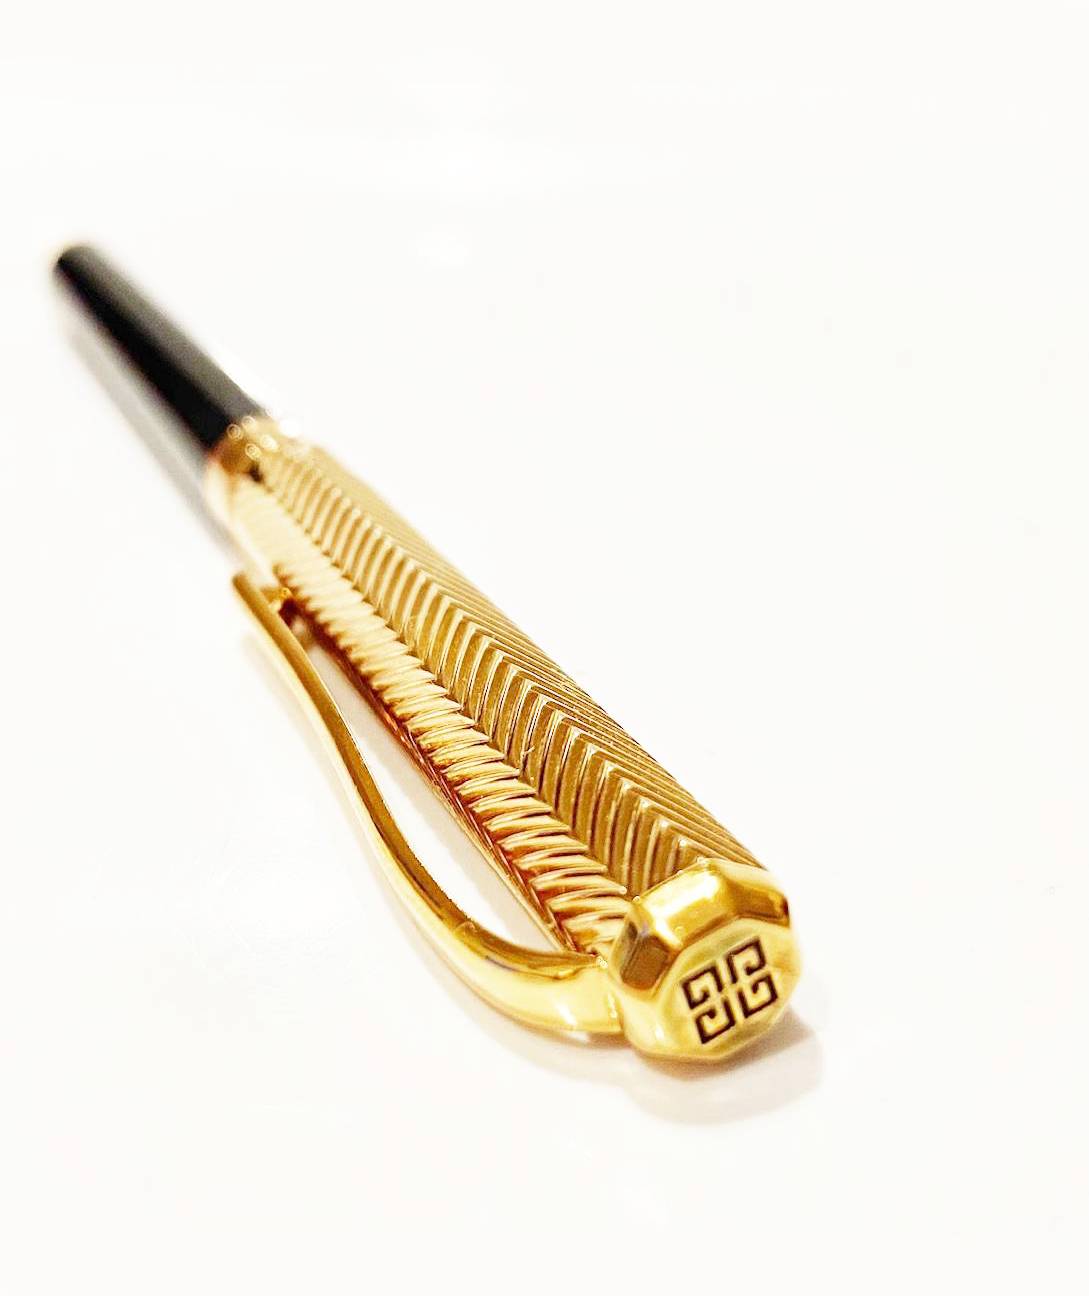 1980s Givenchy Black Resin Ballpoint Pen with Gold-tone Metal Detailing - style - CHNGR